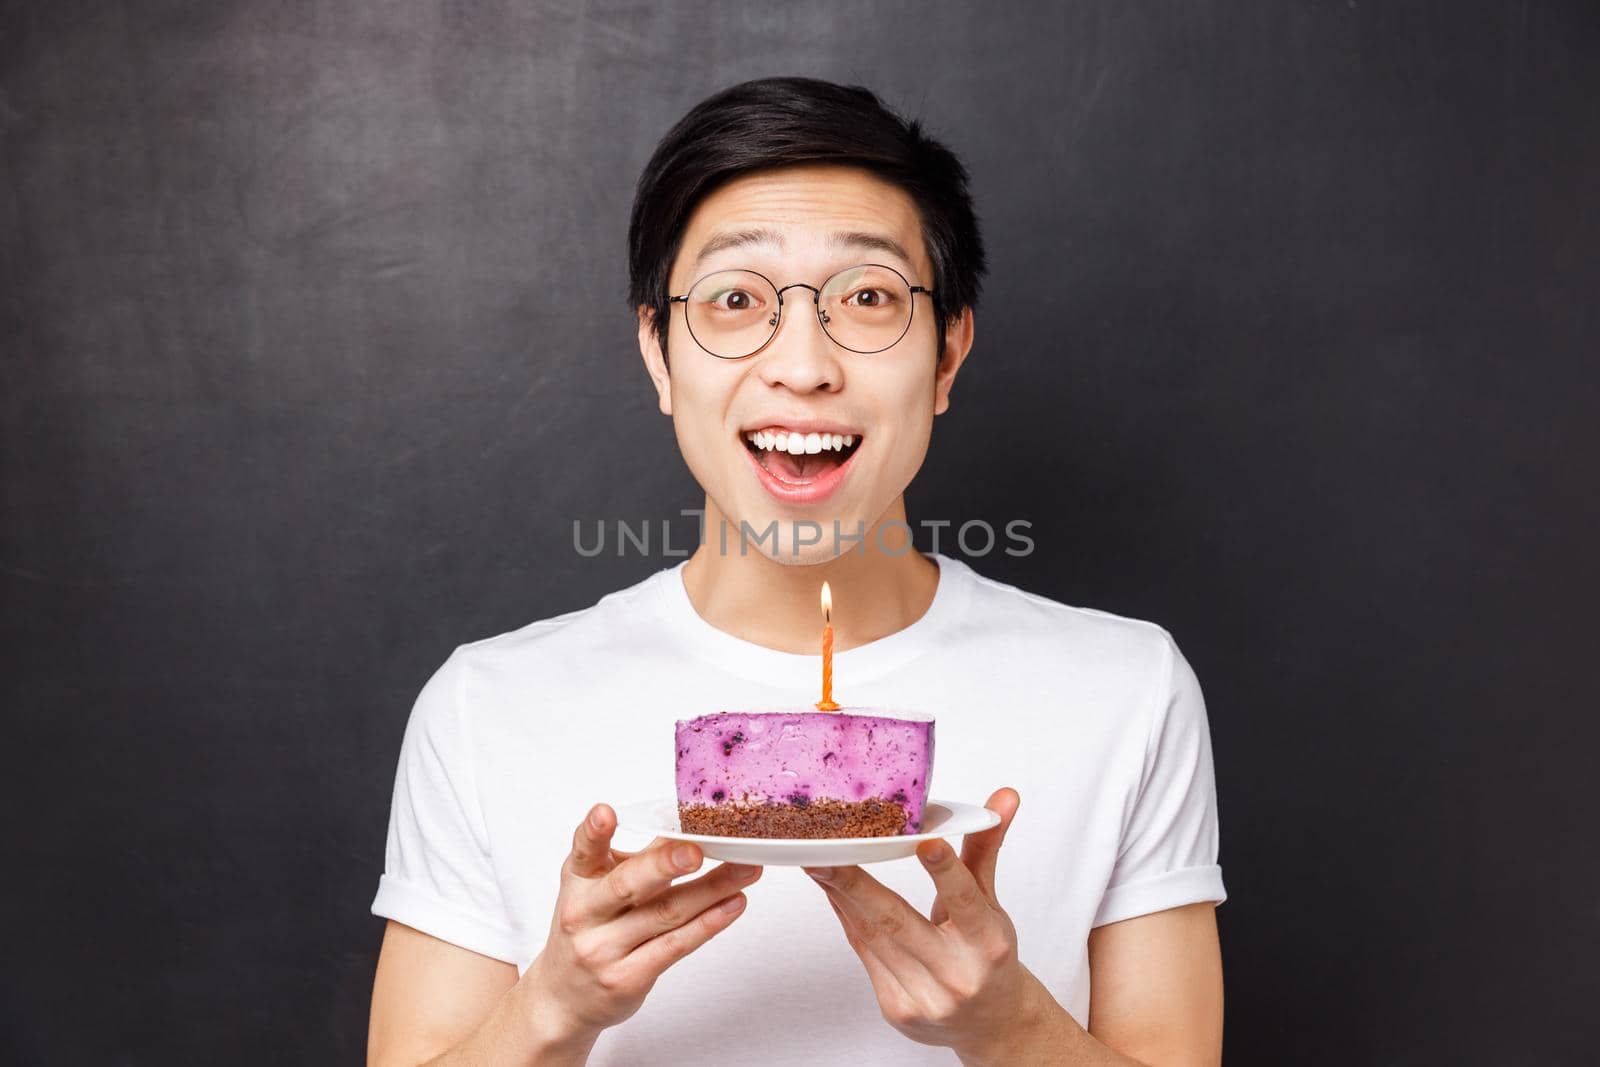 Celebration, holiday and birthday concept. Close-up portrait of amazed and happy young asian man holding b-day cake and smiling amused, throw party, blow out candle for making wish.